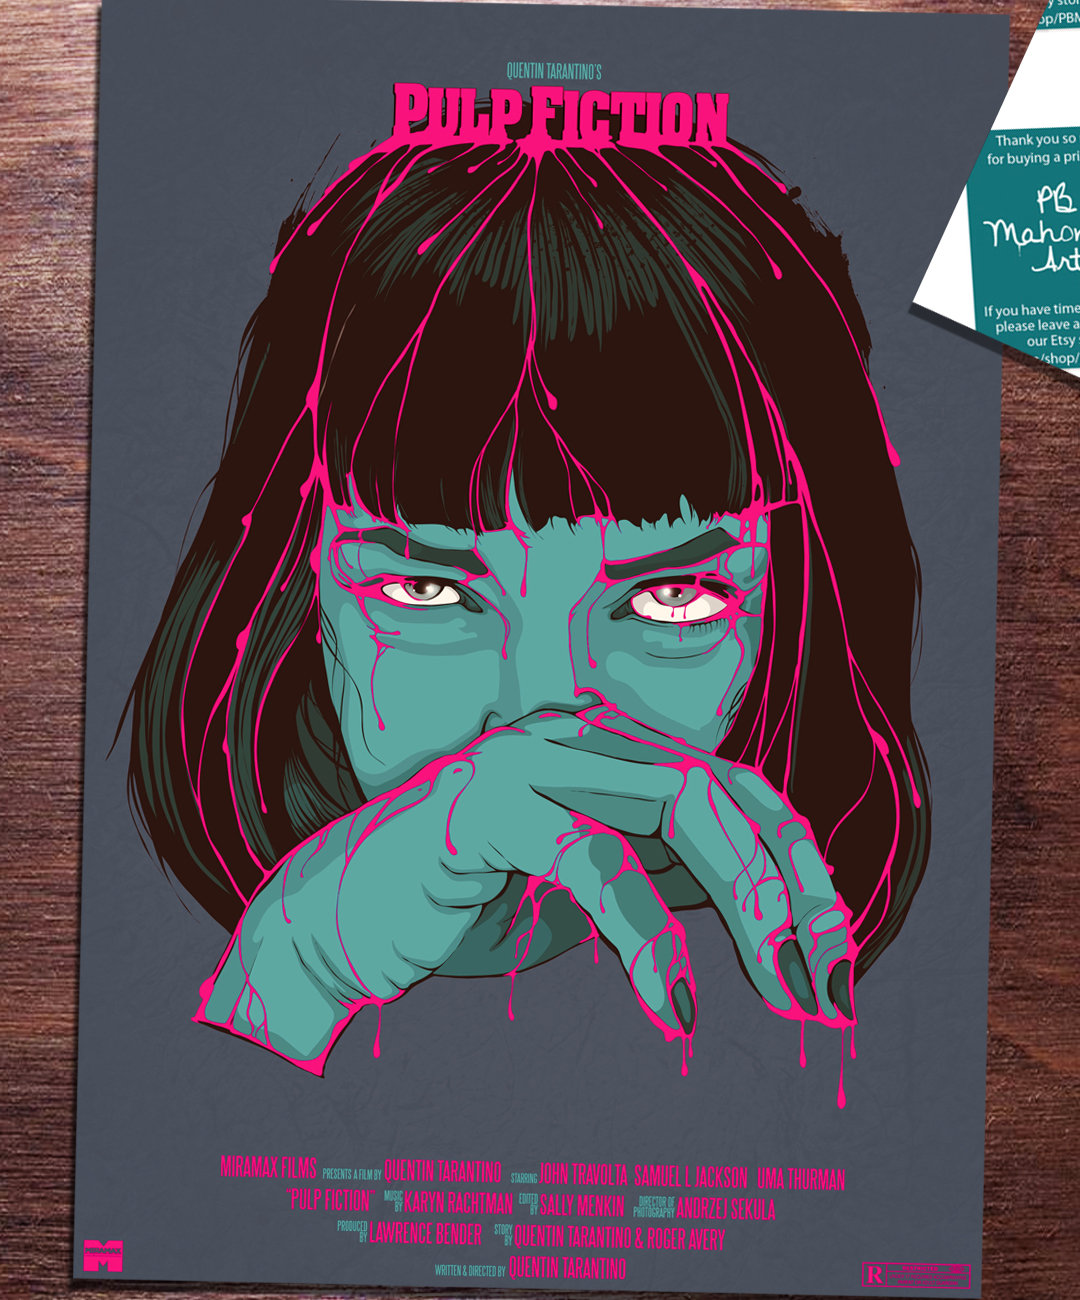 Pulp Fiction Mia Wallace Art Print, Limited Edition, Signed by Artist 